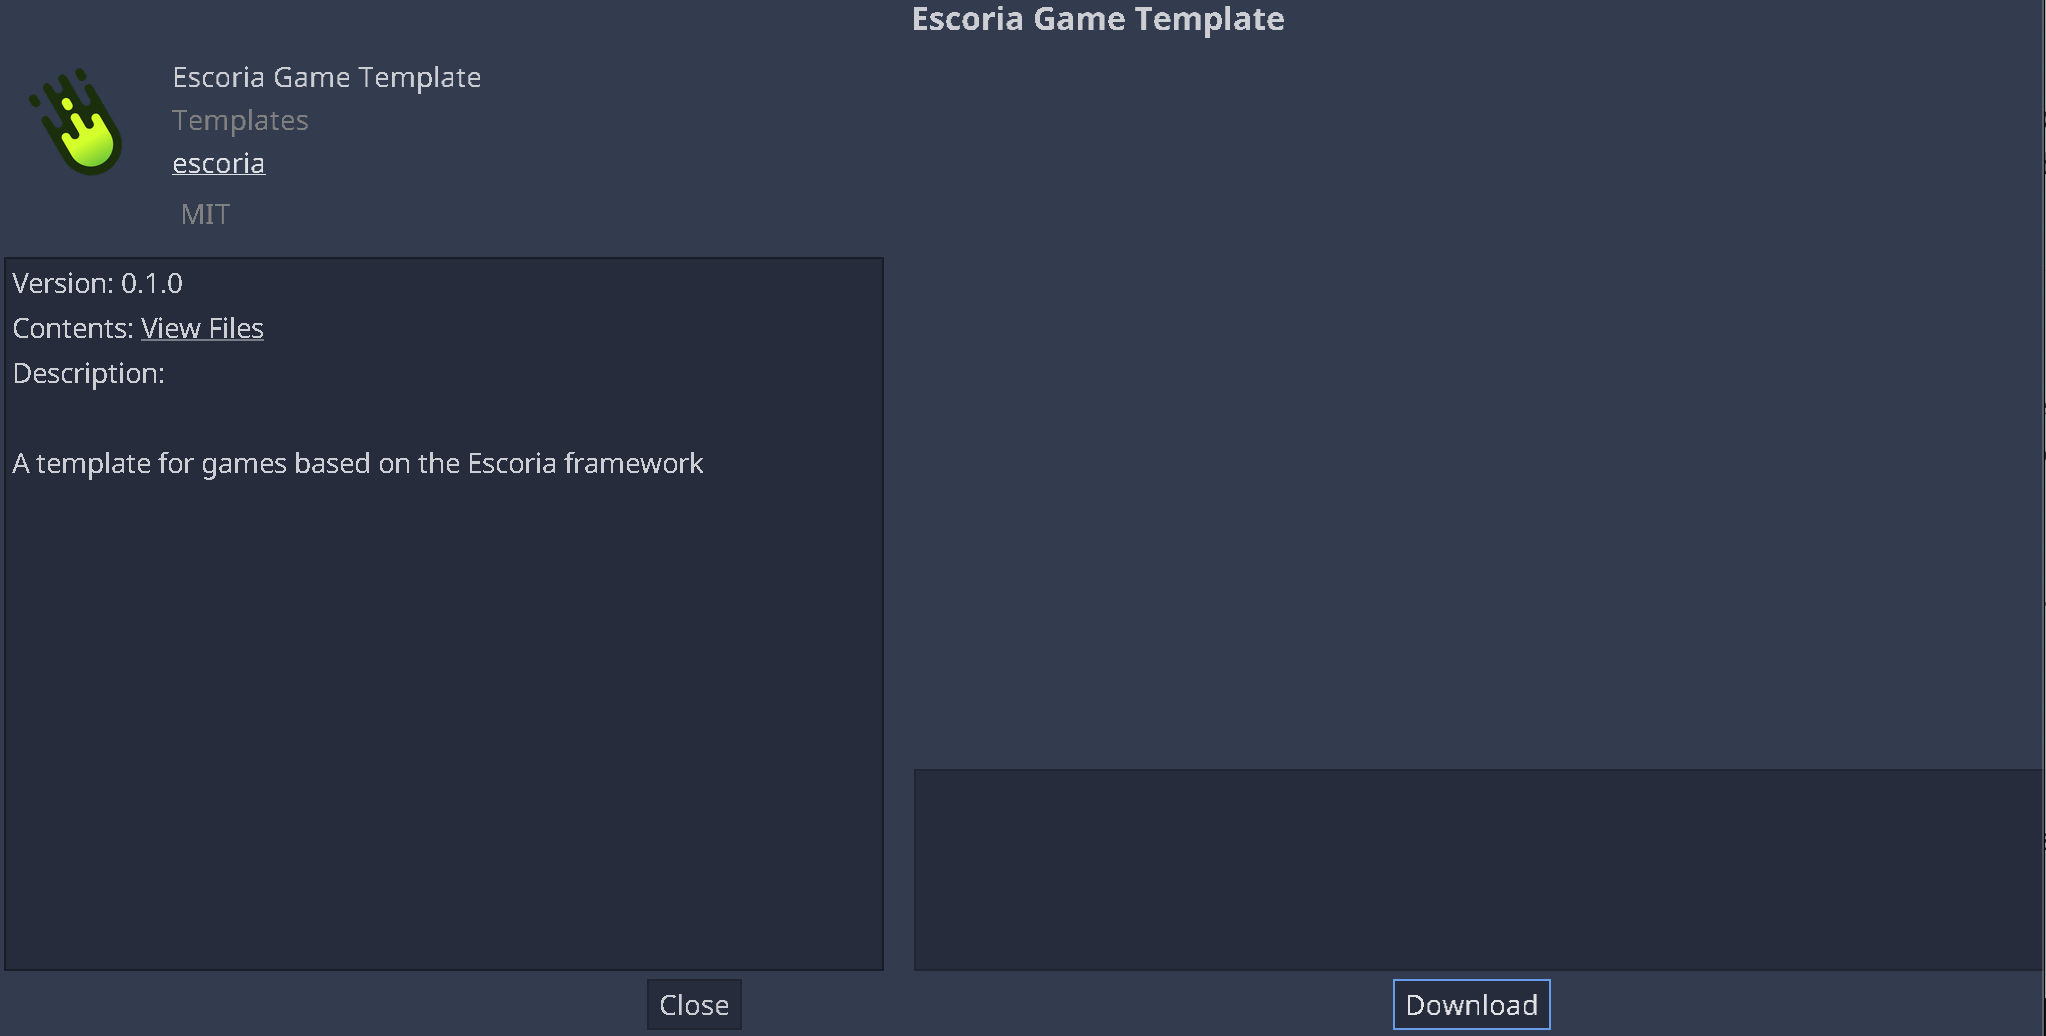 Details from the Escoria game template